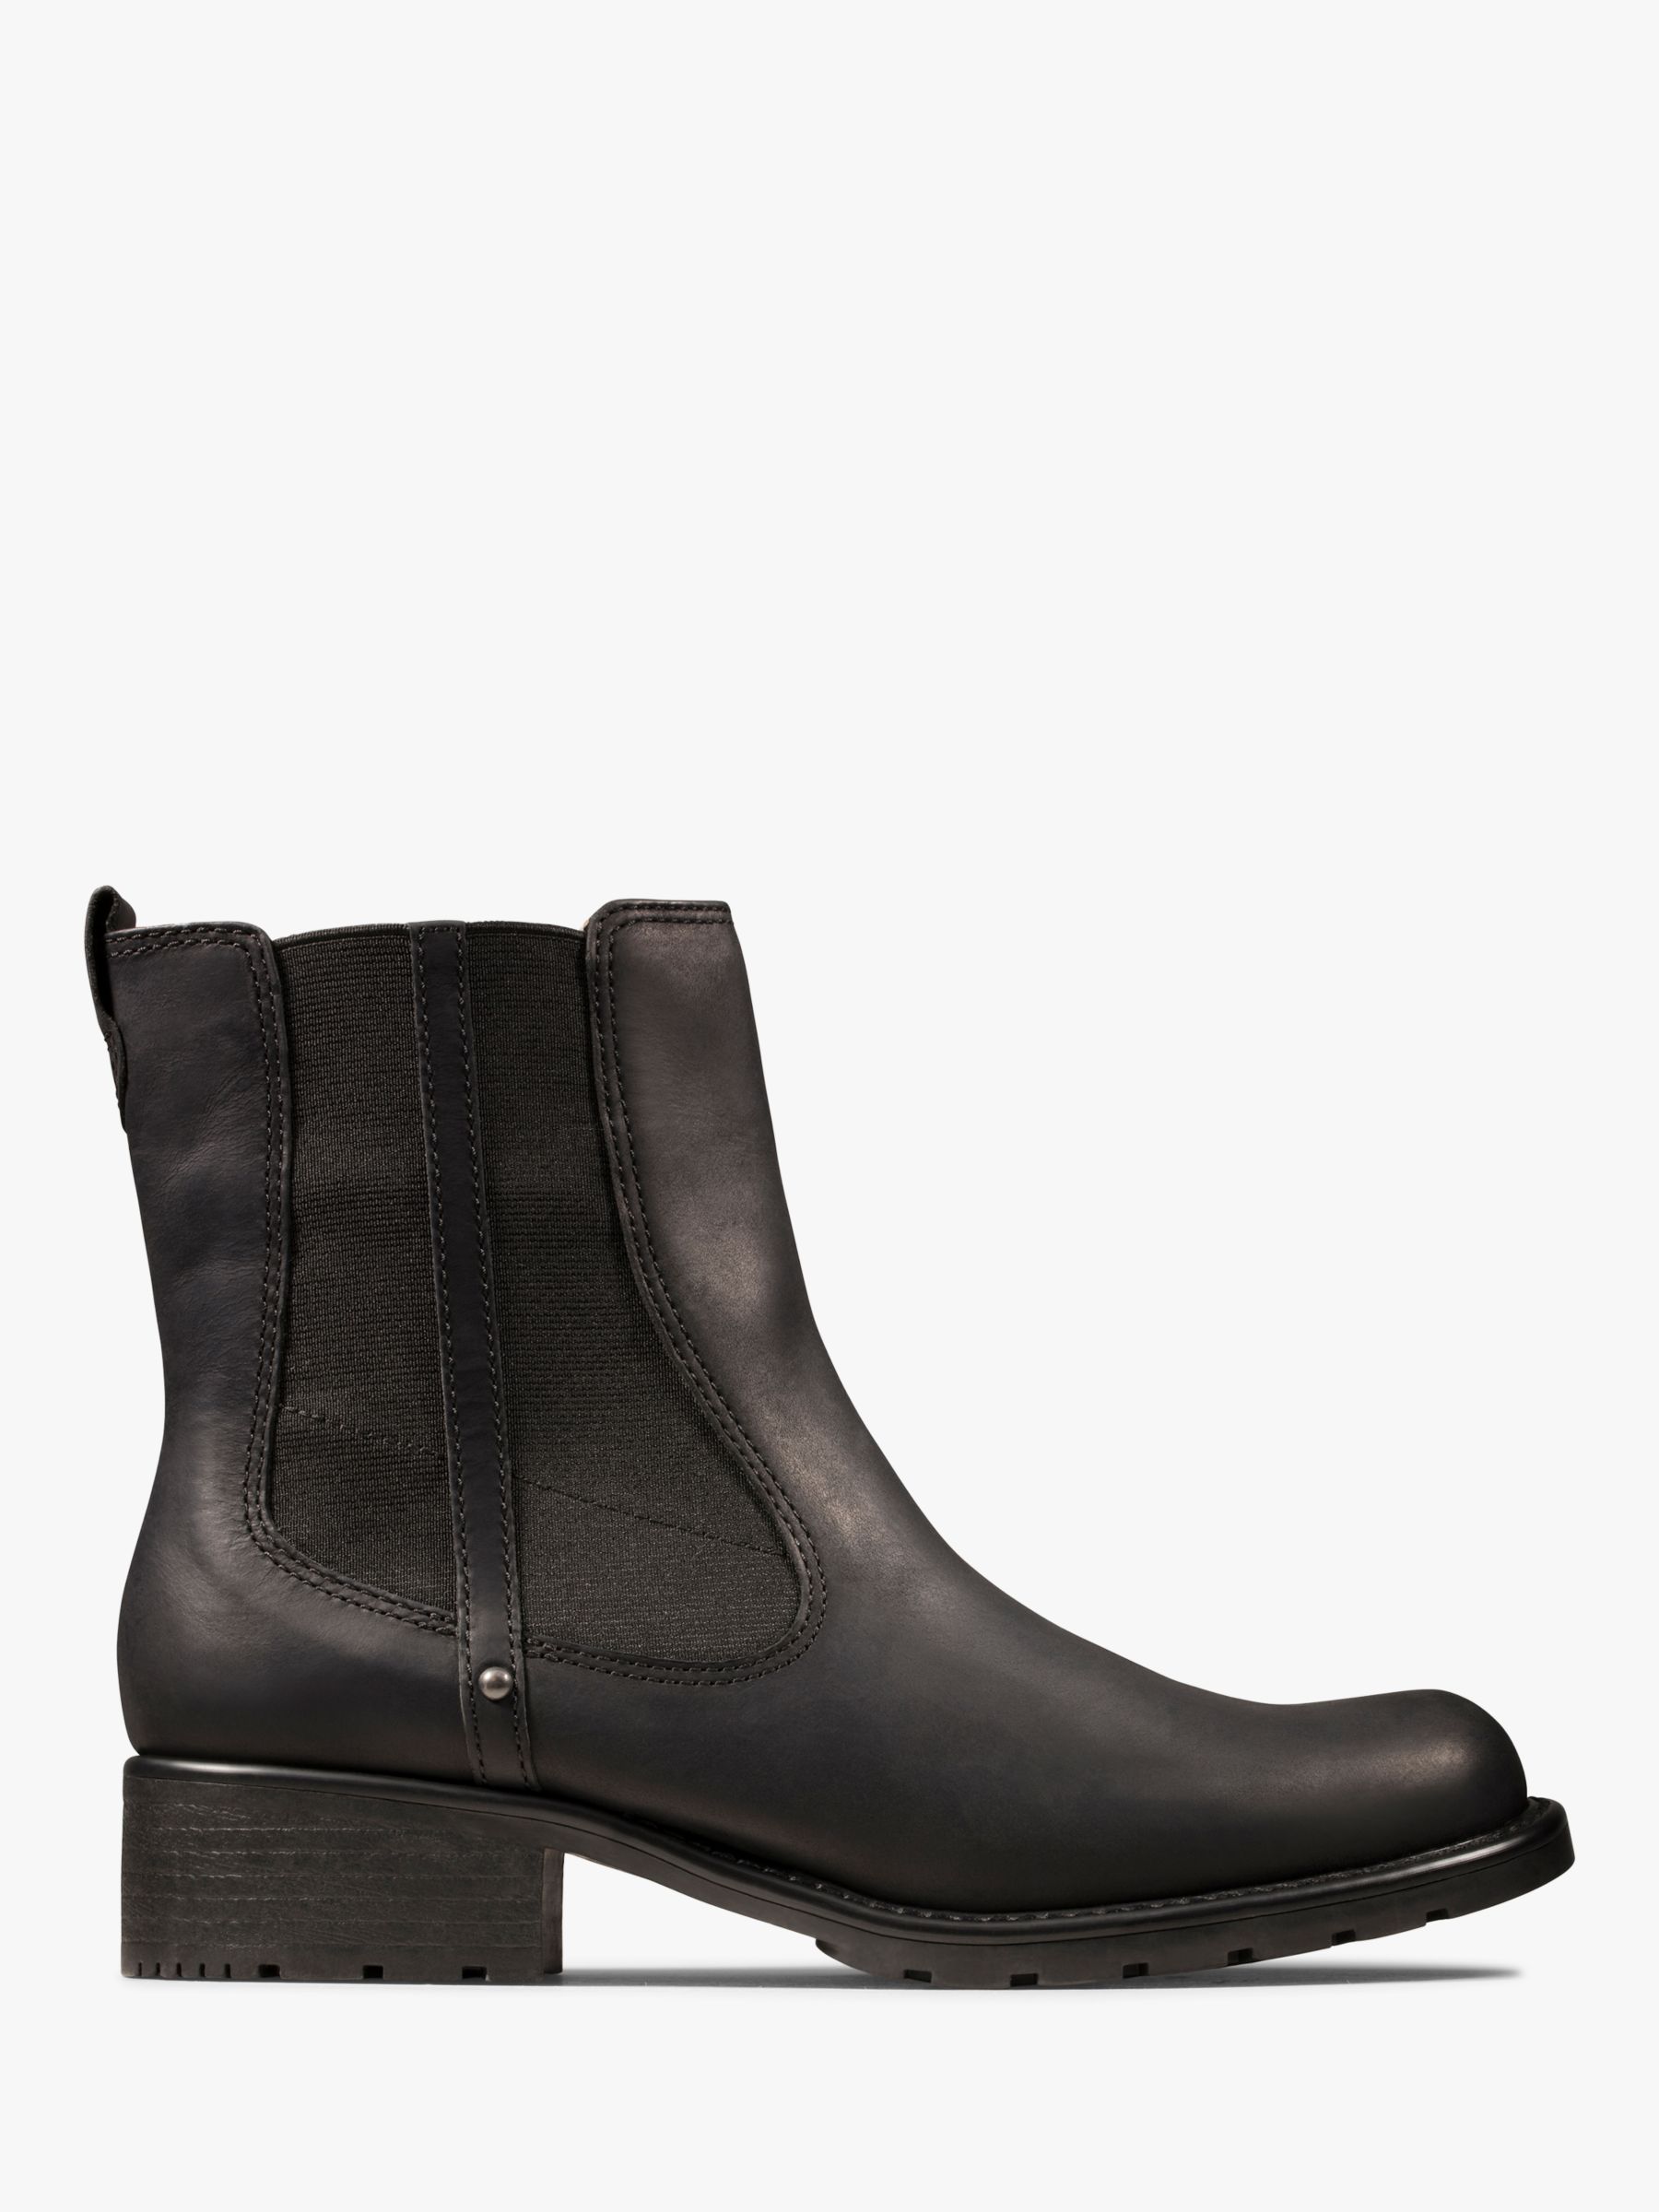 clarks ladies leather ankle boots